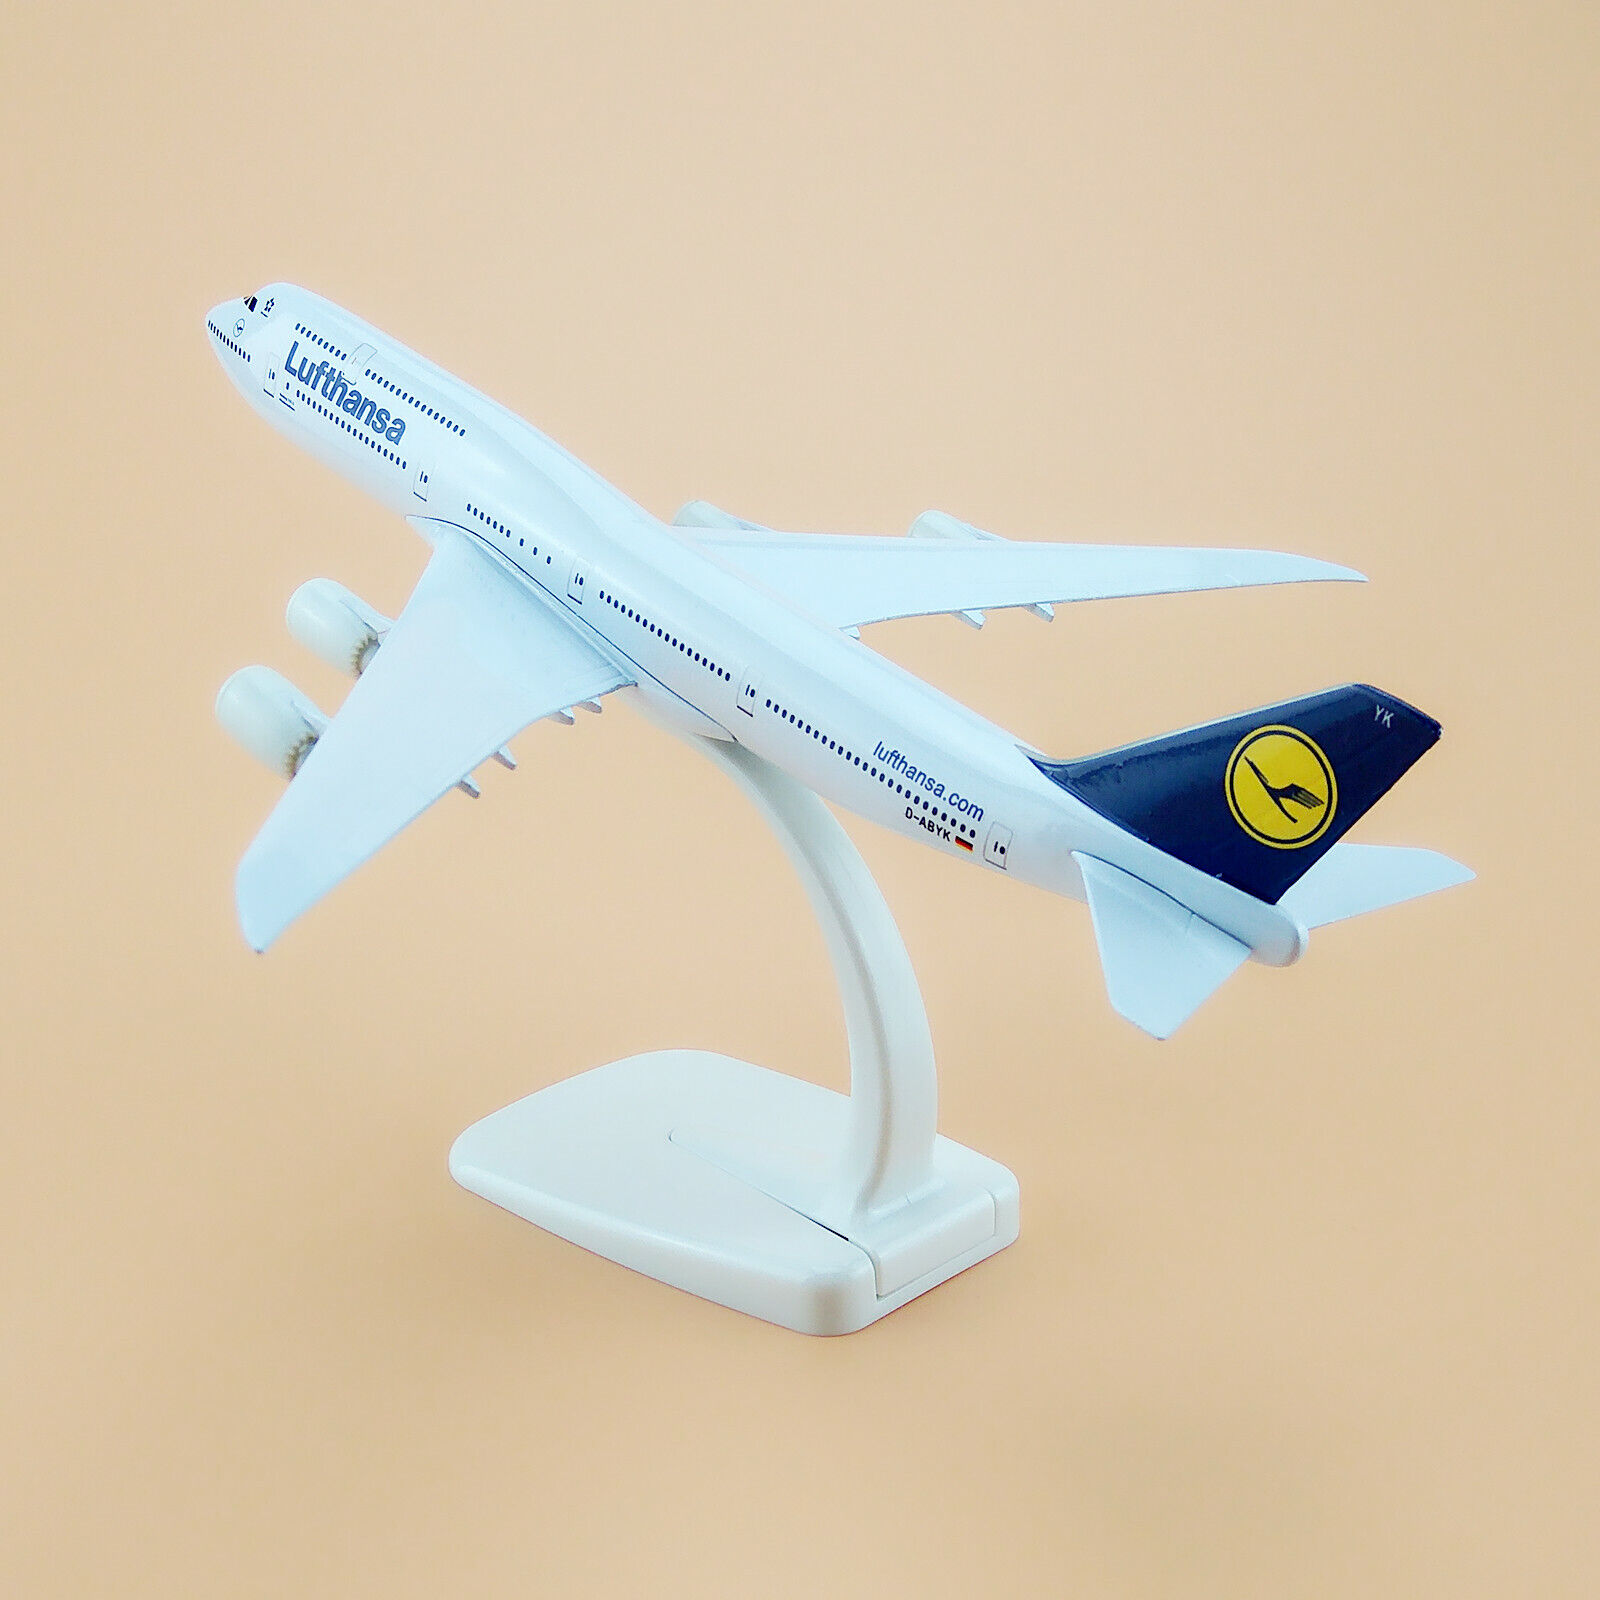 Germany Lufthansa Boeing 747 Airlines Airplane Model Plane Metal Aircraft 20cm